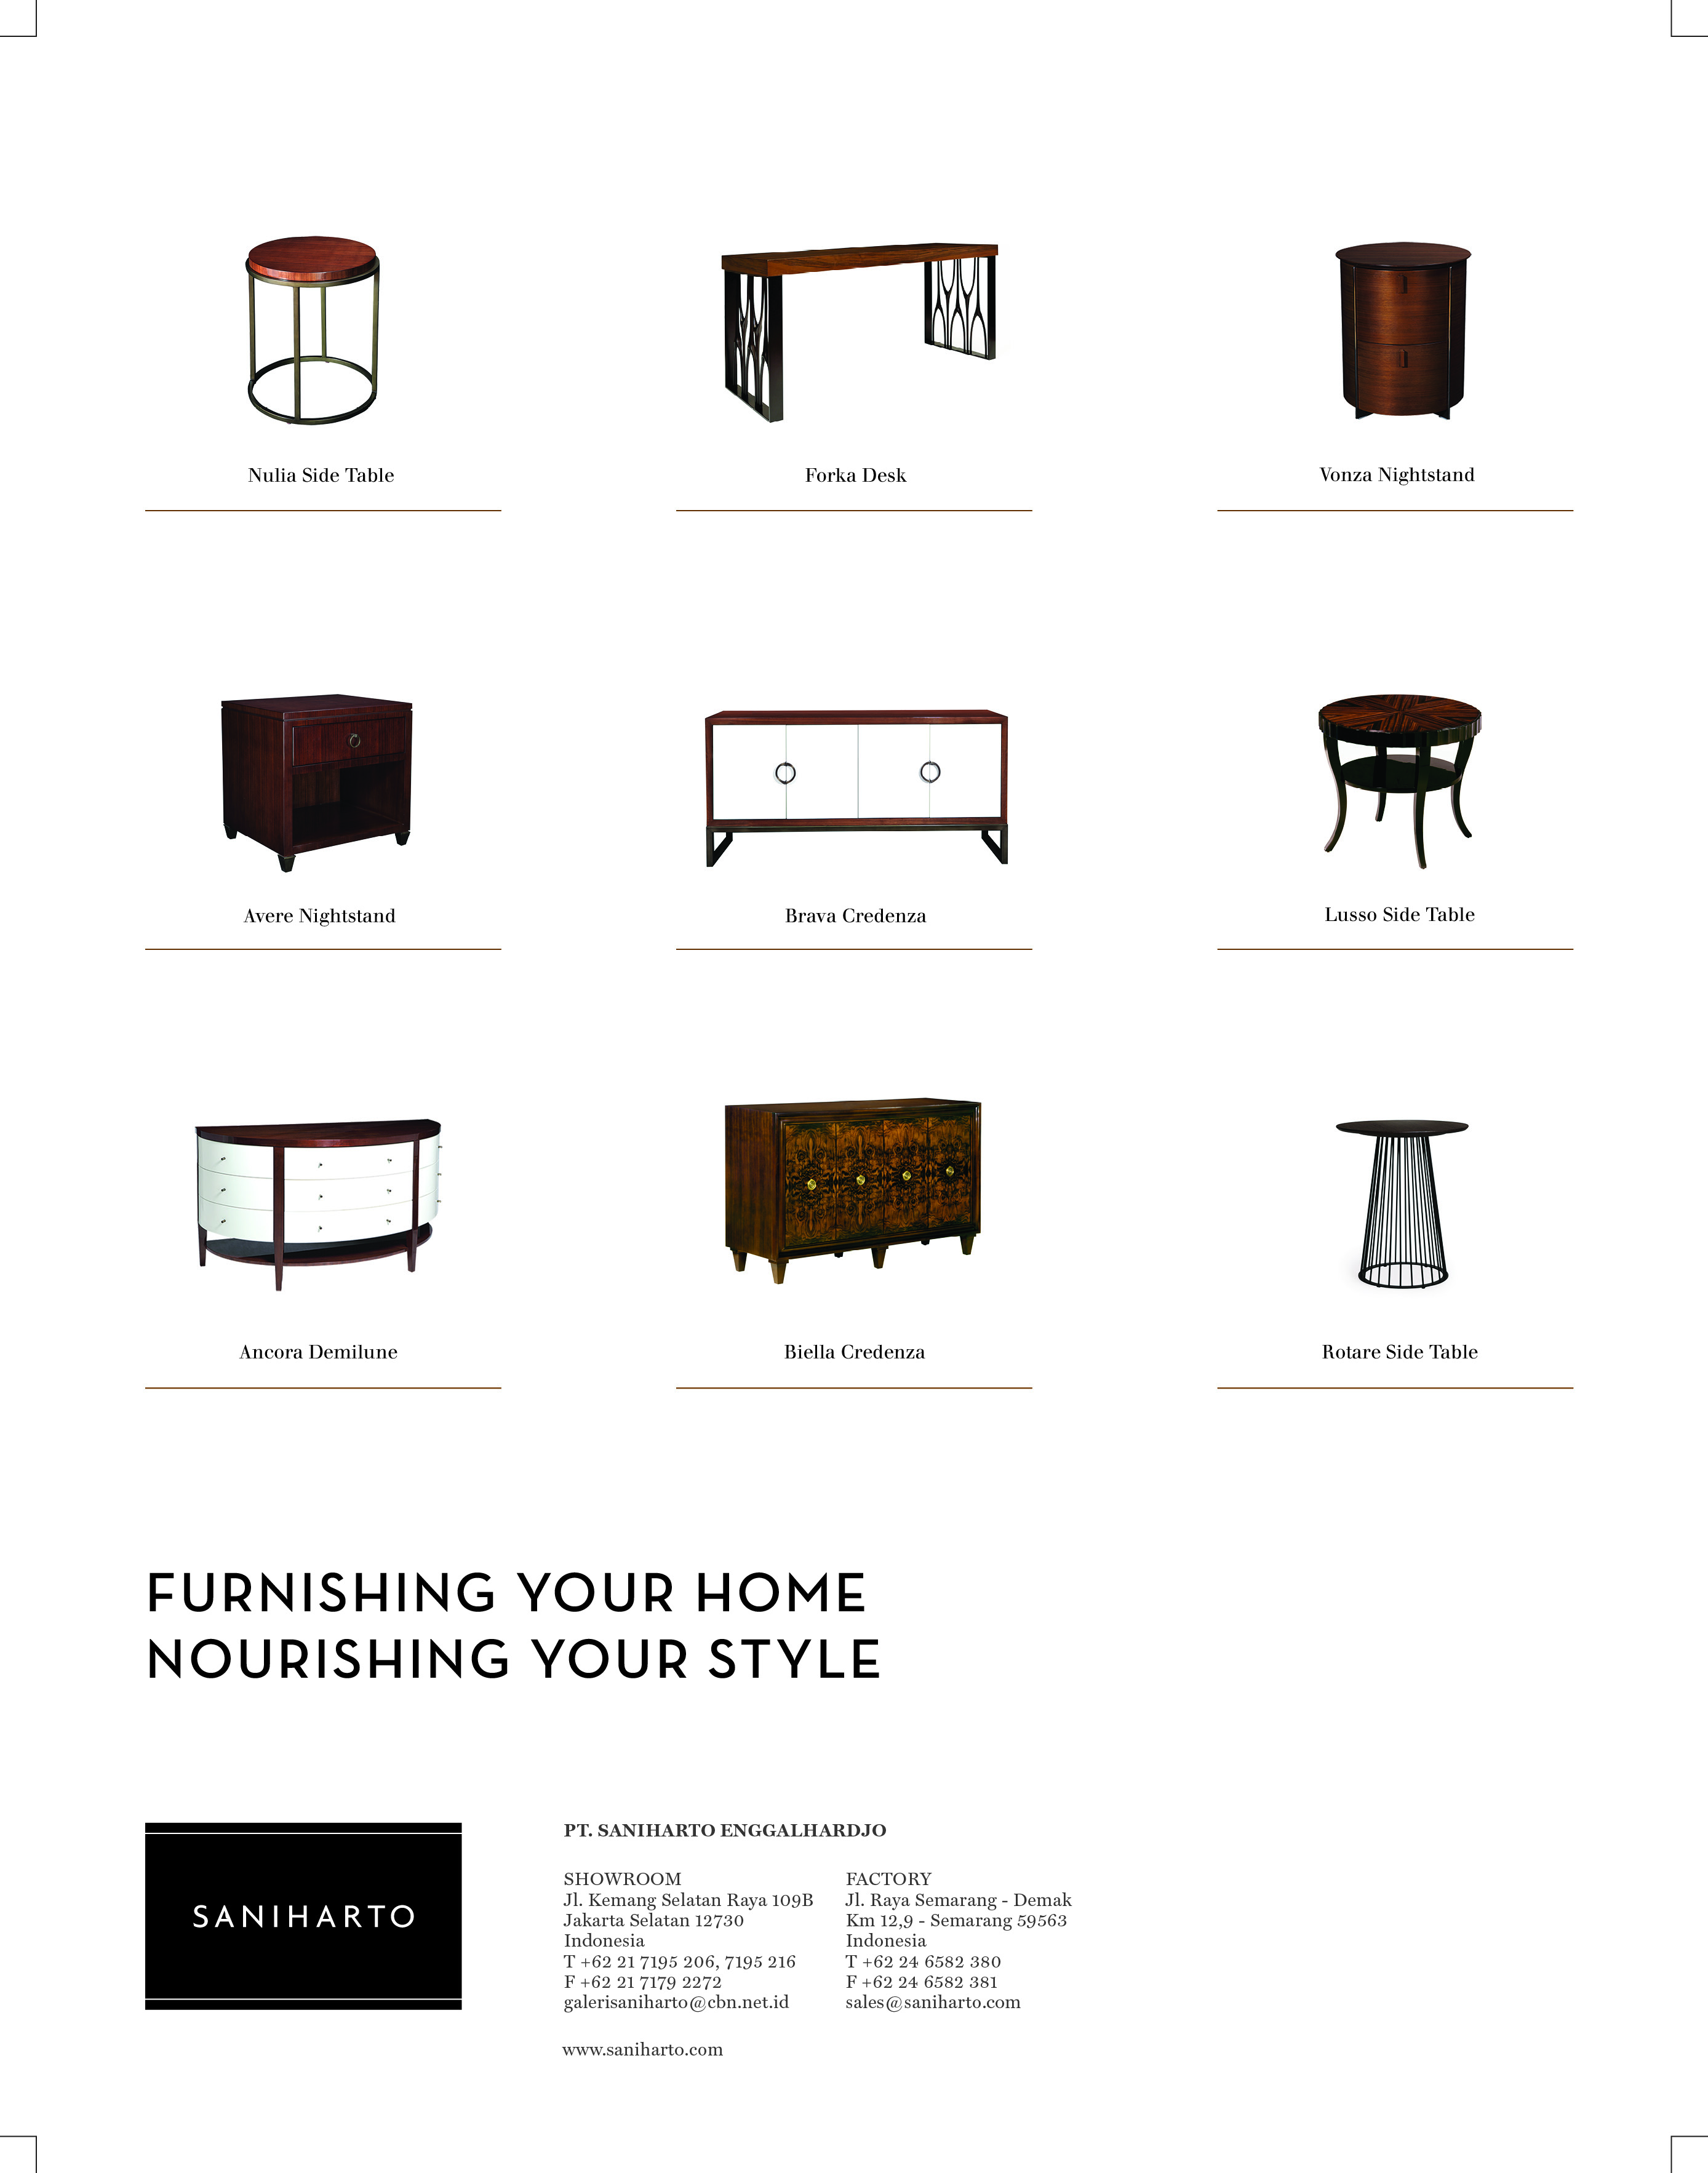 Furnishing your home, nourishing your style